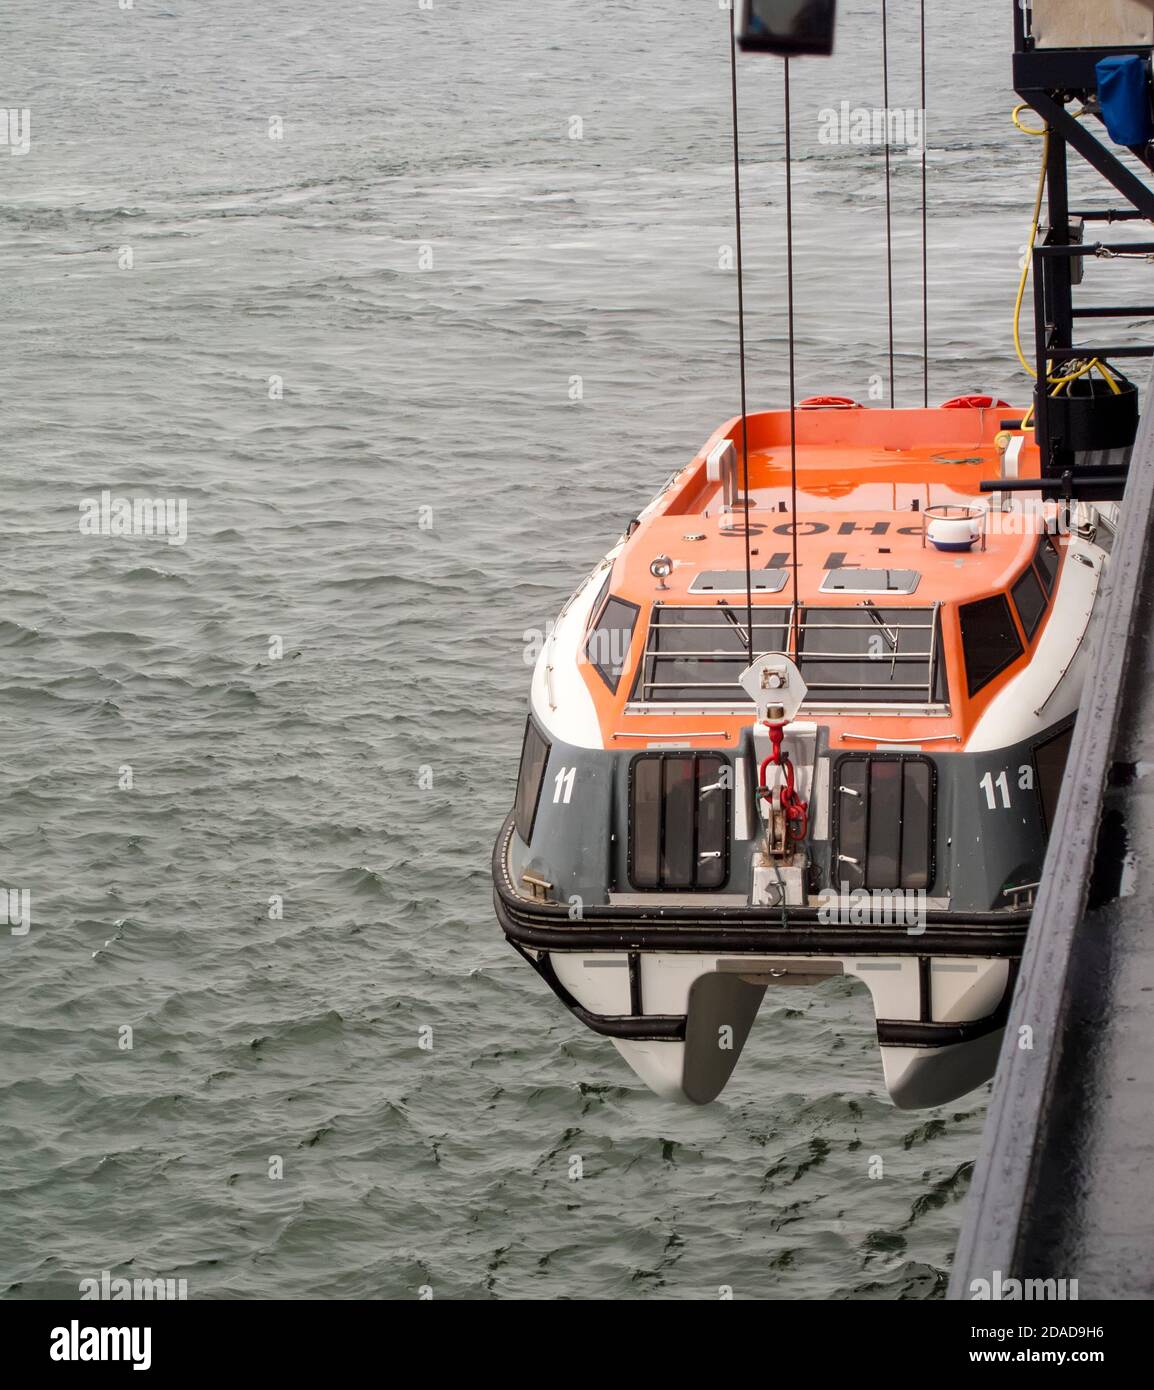 Lifeboat being lowered into water Stock Photo